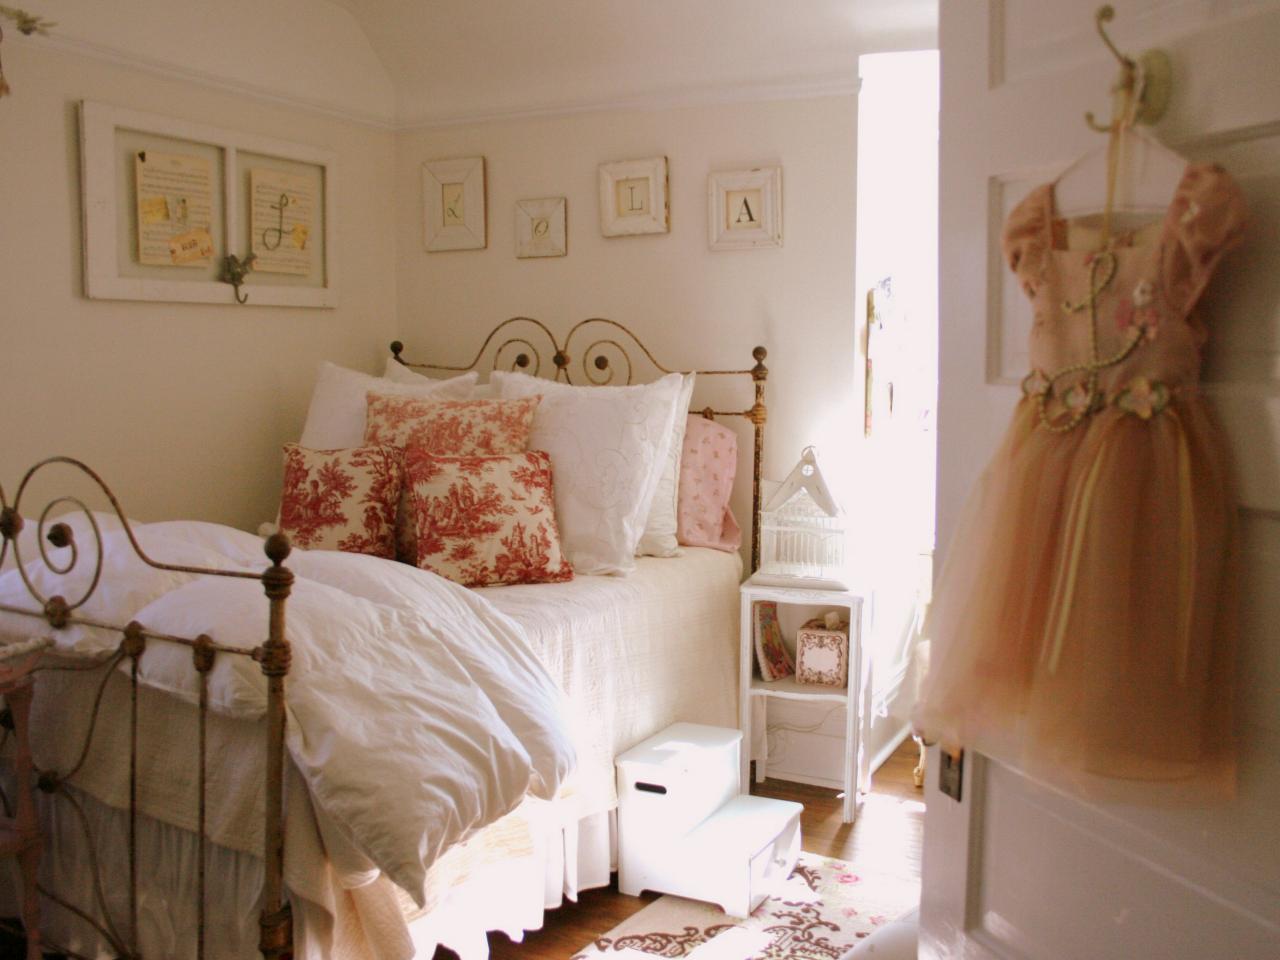 romantic-valentines-themed-small-girly-bedroom-decorating-ideas-with-comfortable-full-size-wroughtiron-bedstead-include-pure-white-bedding-sheet-plus-pink-flower-patterned-soft-foam-pillows-moreover-b